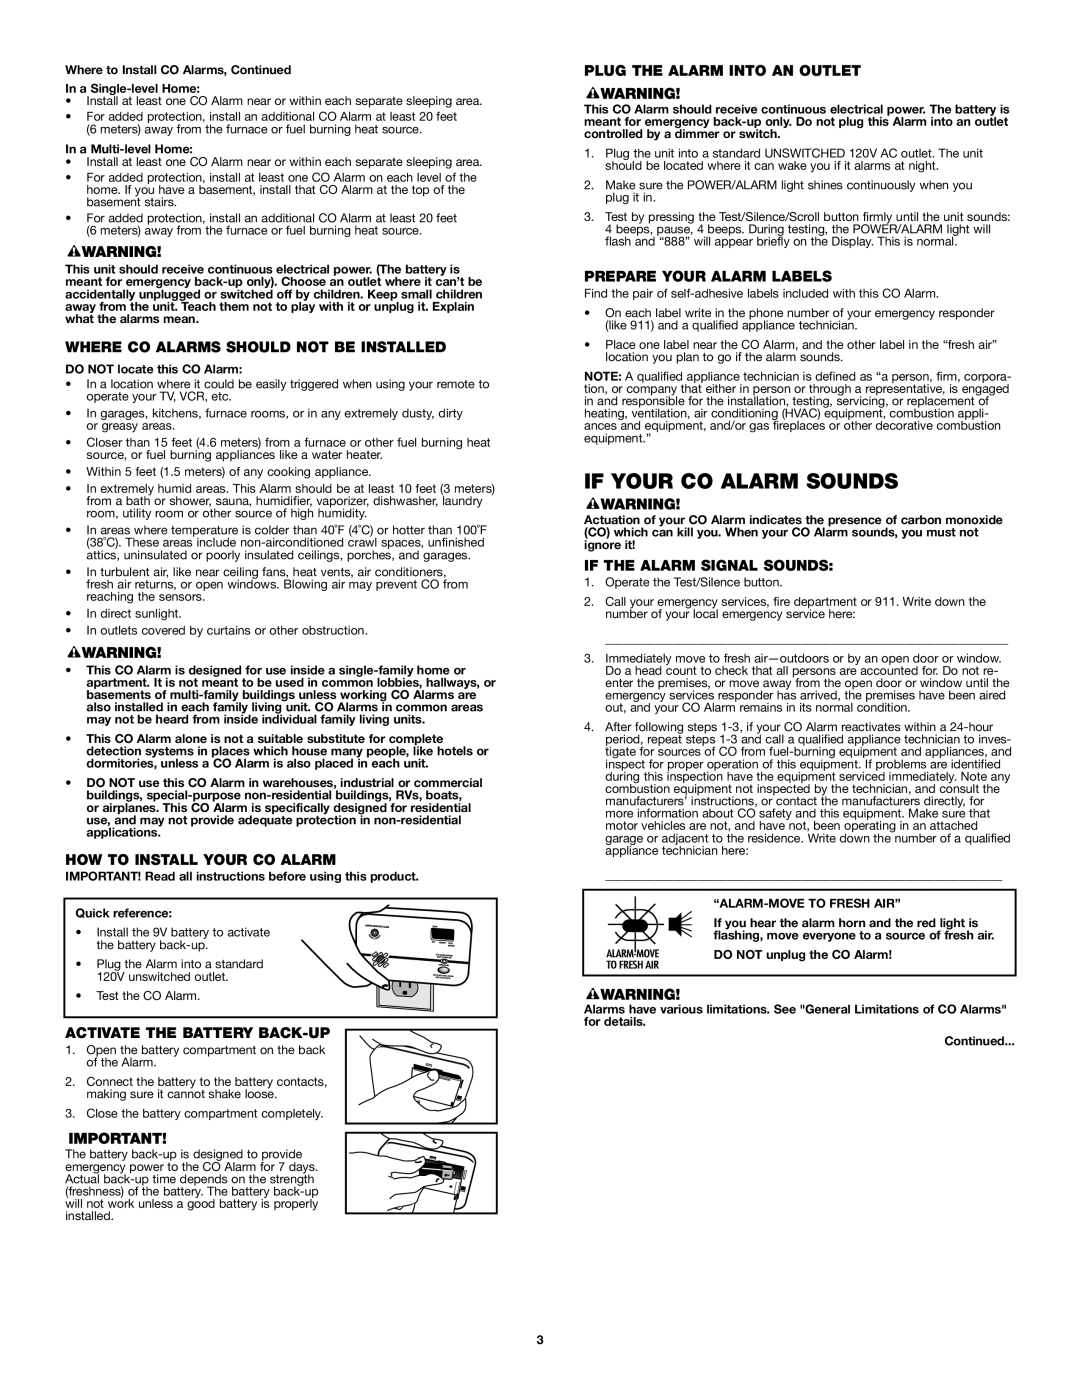 First Alert FCD4 user manual If Your Co Alarm Sounds, Where Co Alarms Should Not Be Installed, How To Install Your Co Alarm 